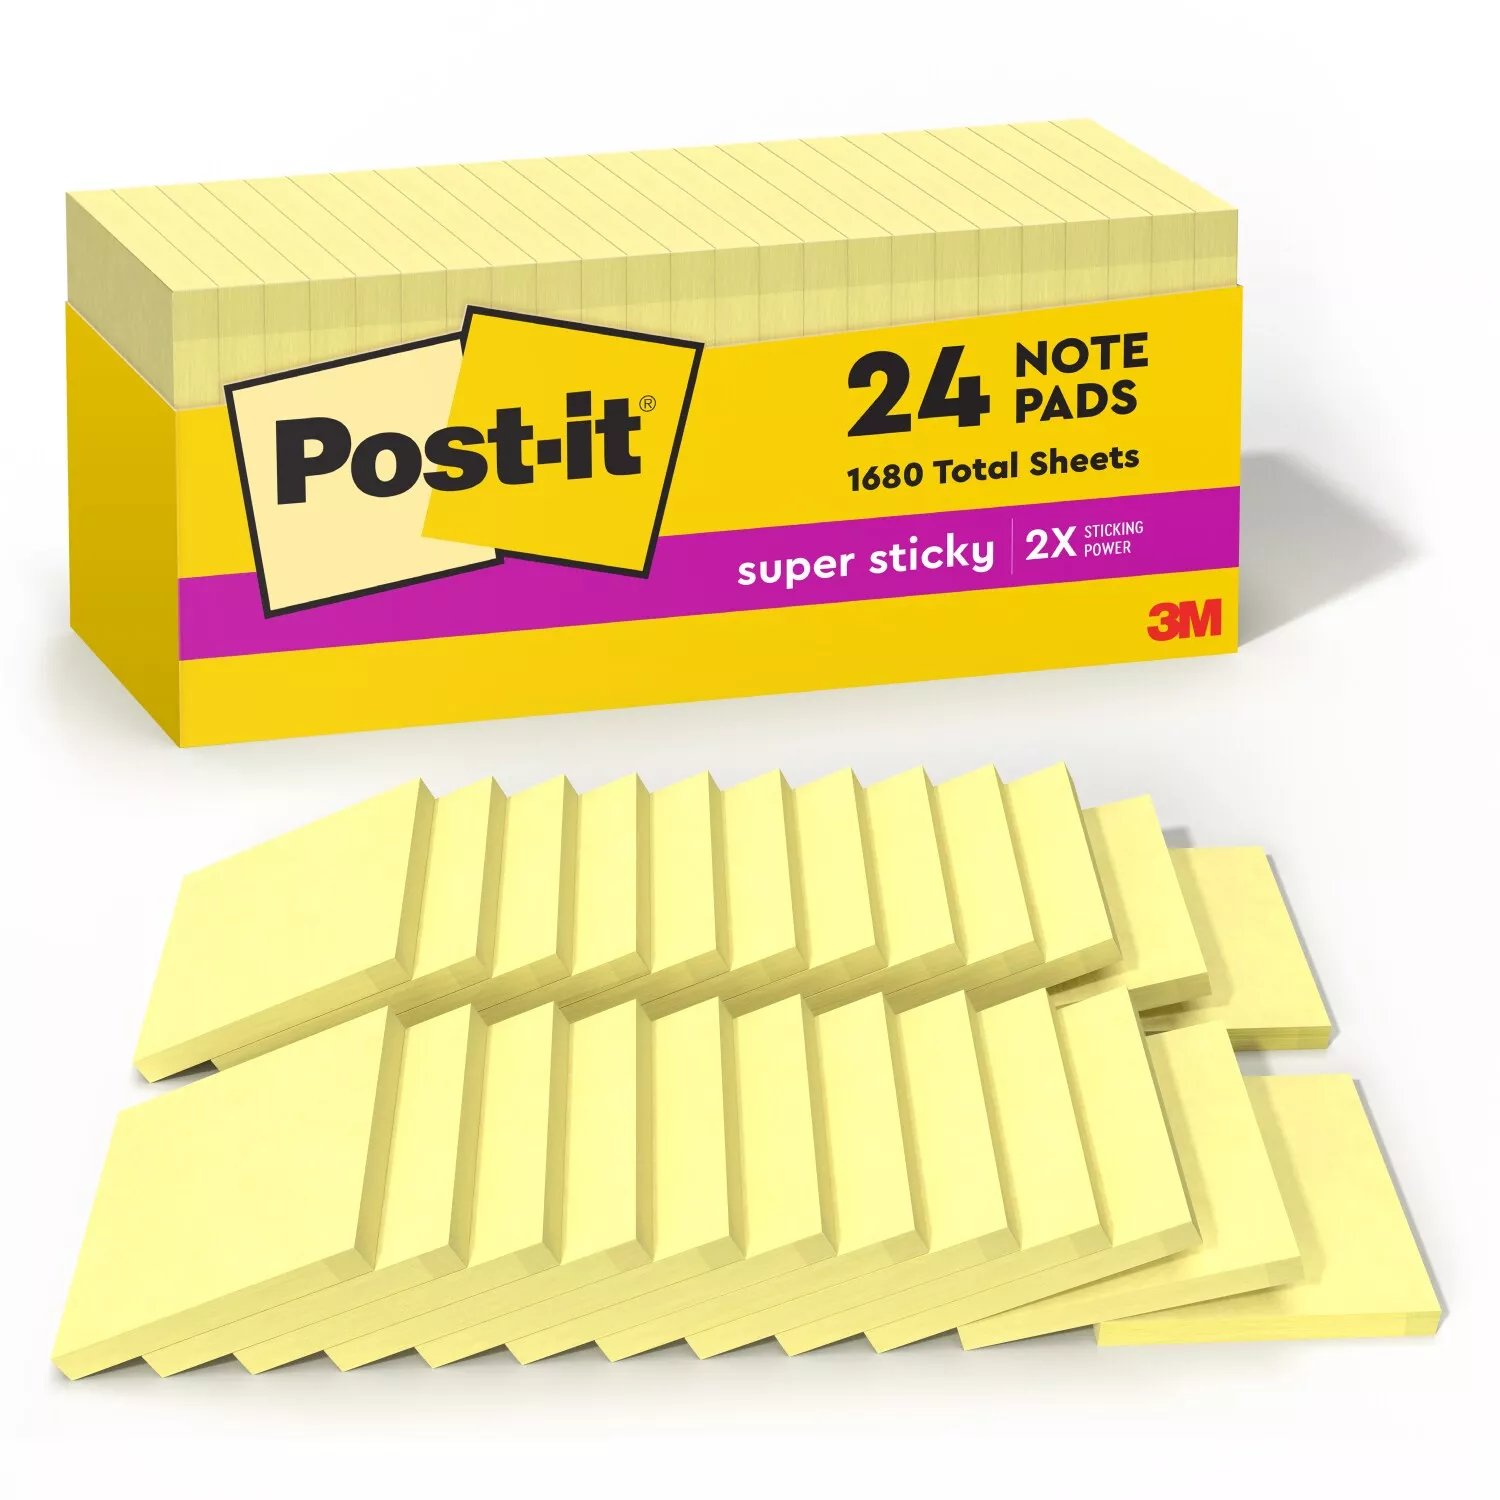 Post-it® Super Sticky Notes 654-24SSCP, 3 in x 3 in (76.2 mm x 76.2 mm)
Canary